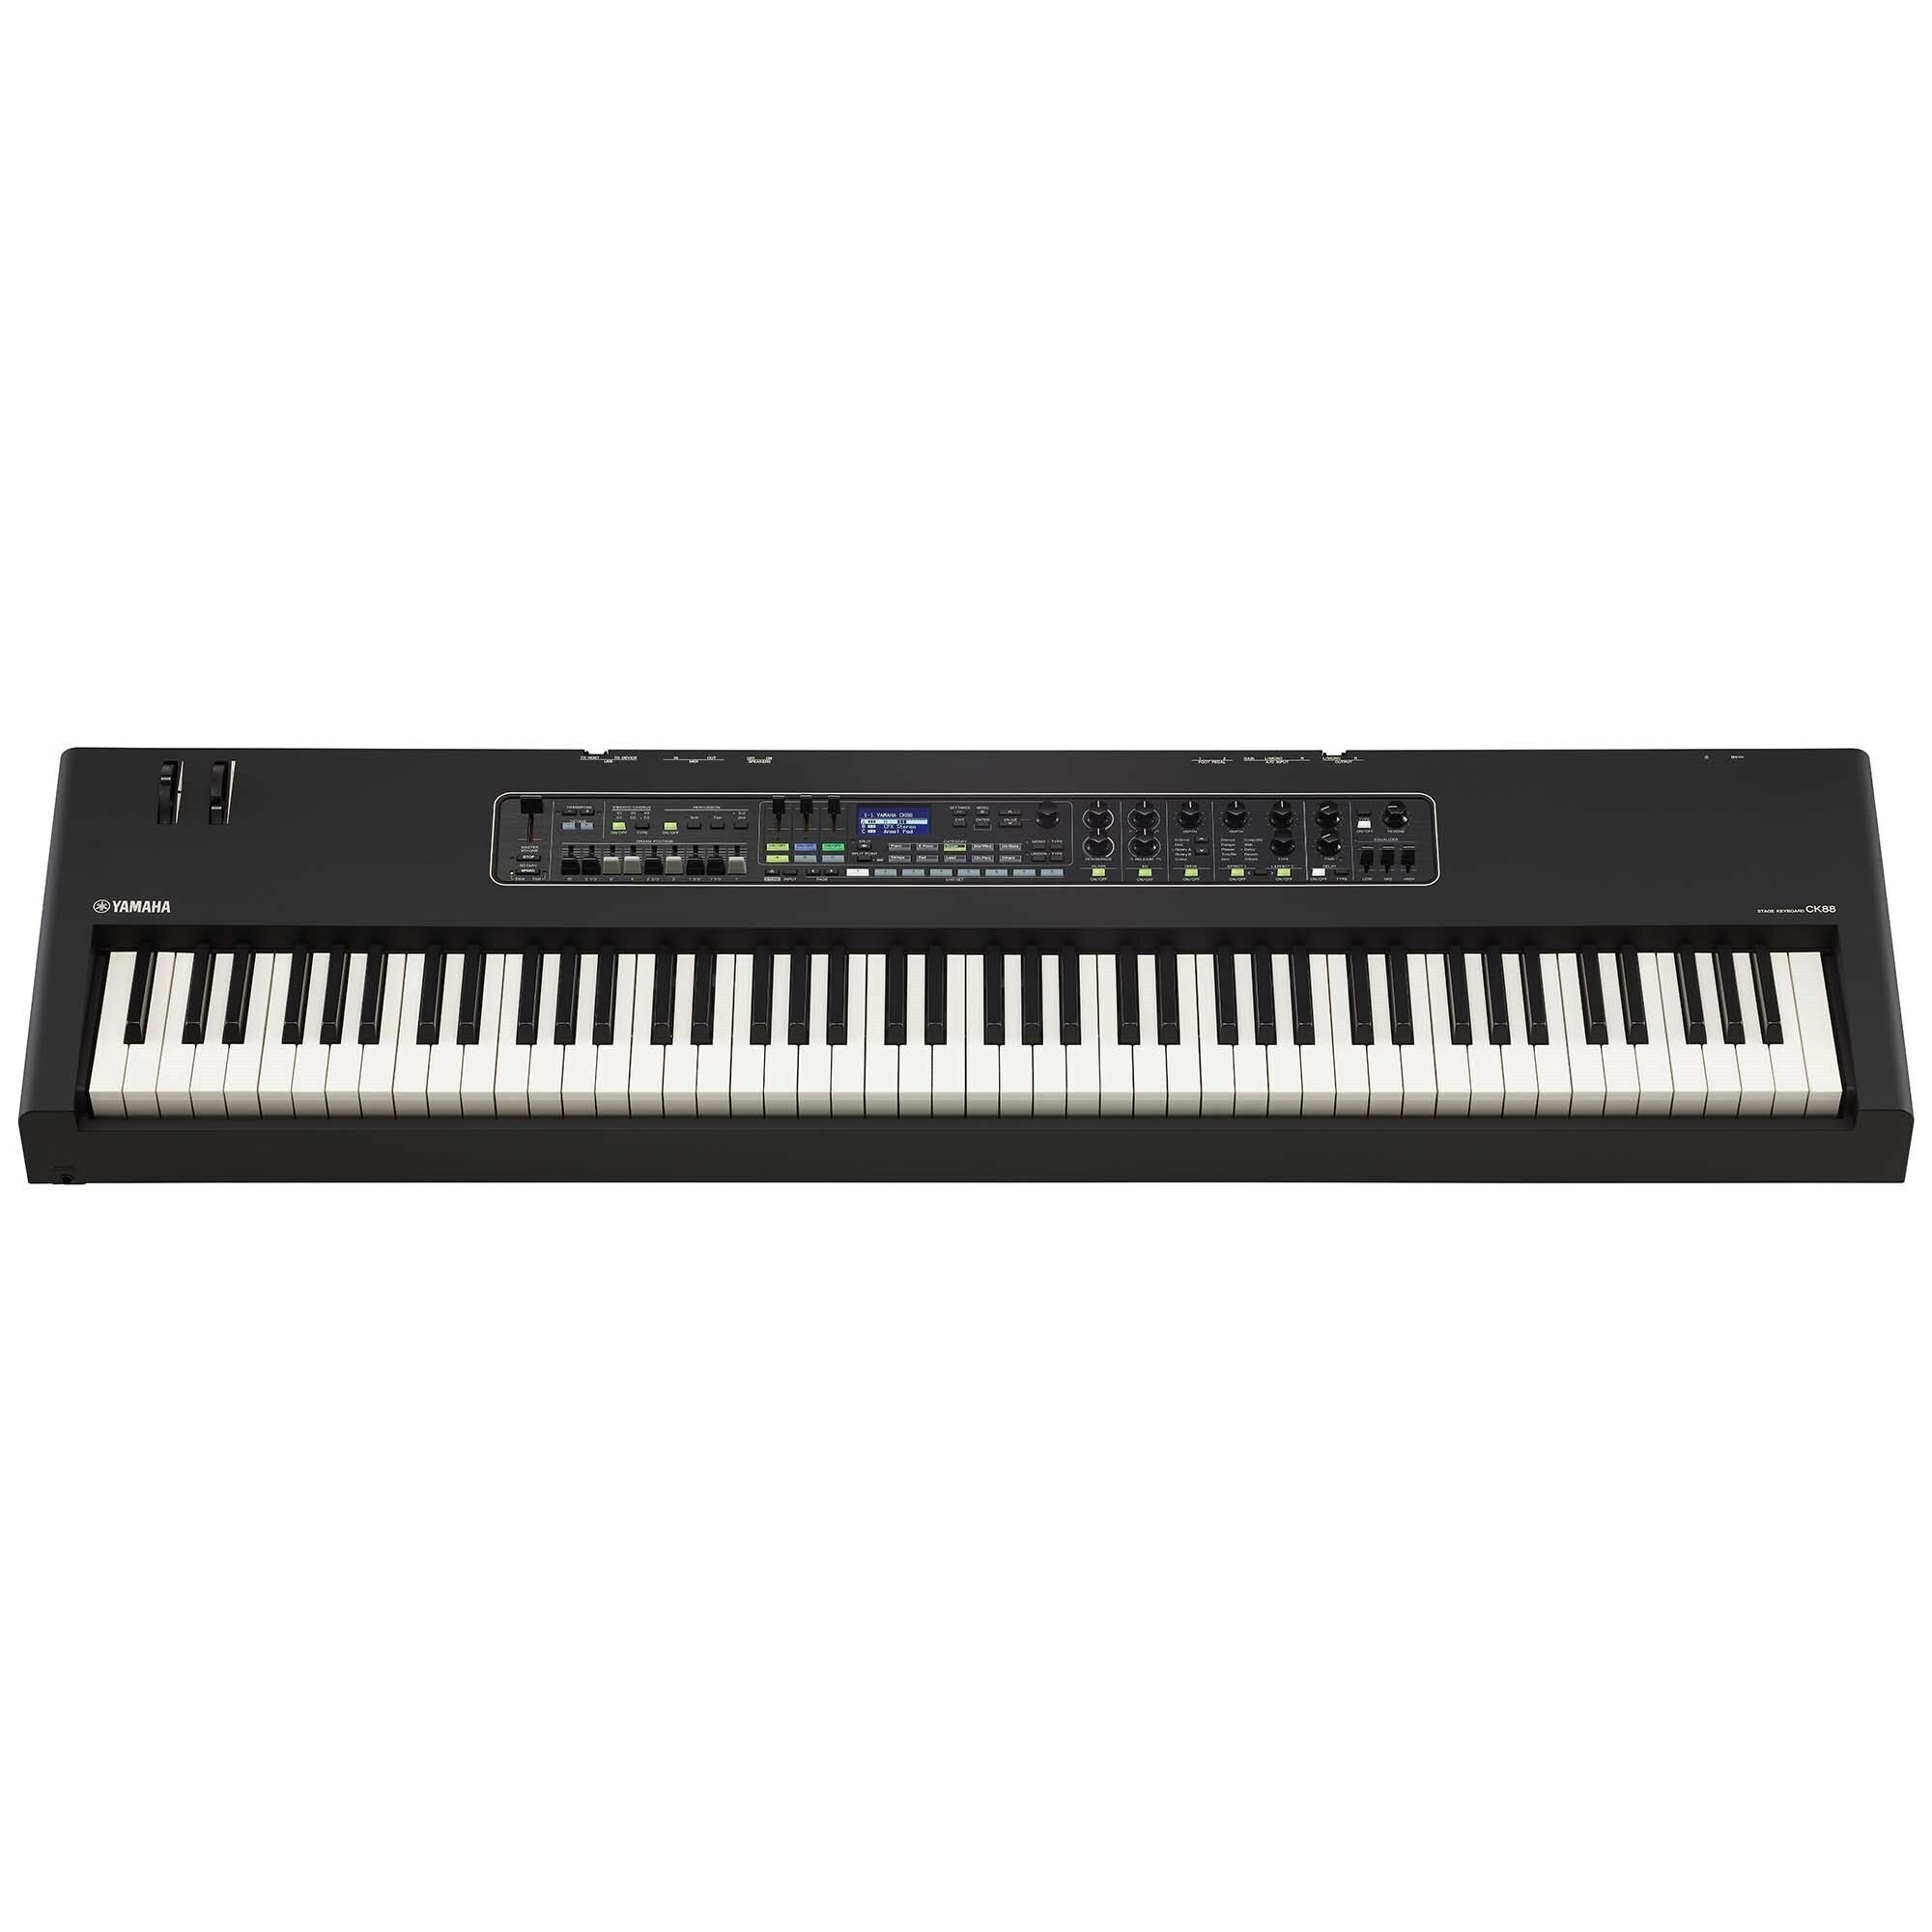 88-Key Stage Keyboard with Built-In Speakers, MIDI Interface, and USB Audio (Black) - Yamaha CK88